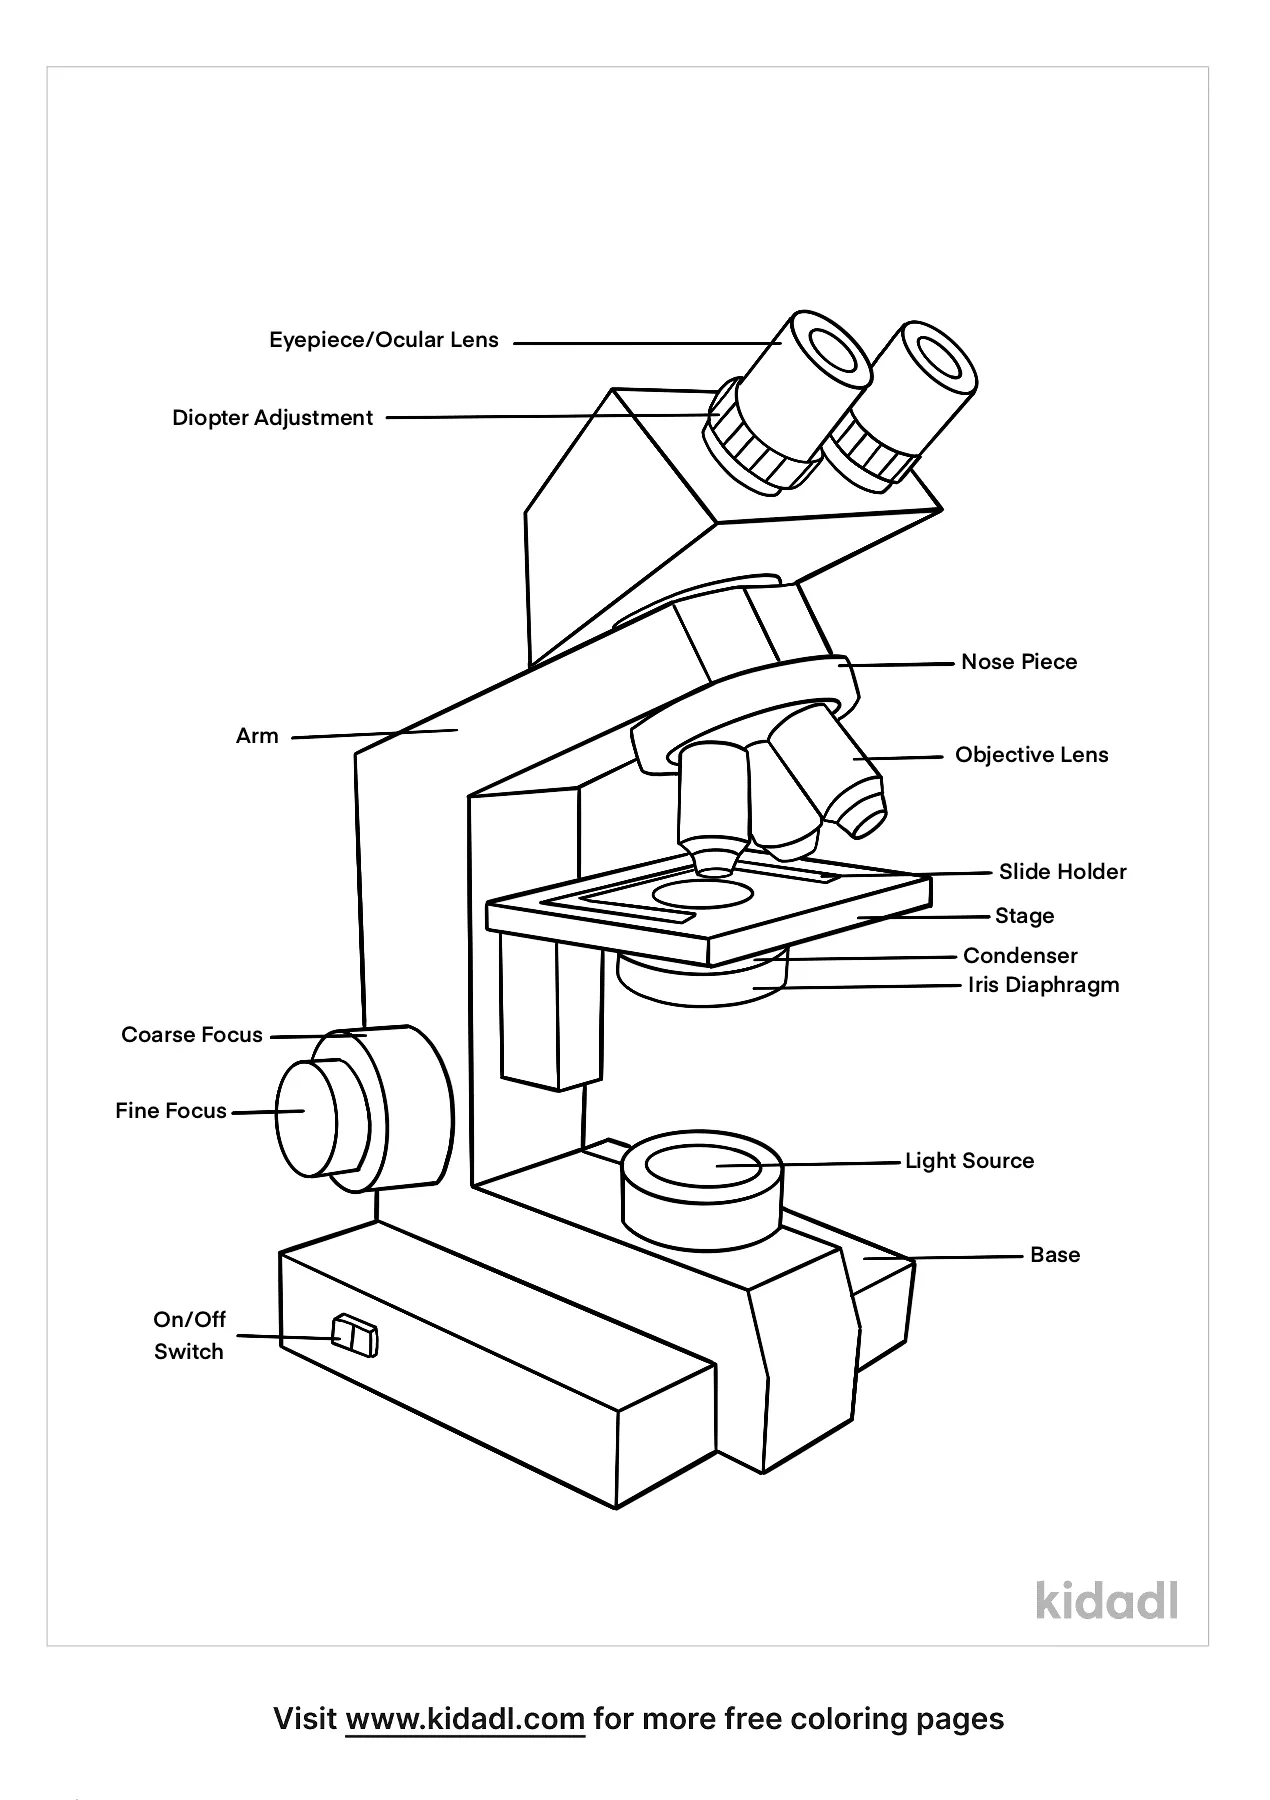 Free Microscope Parts Coloring Page | Coloring Page Printables | Kidadl